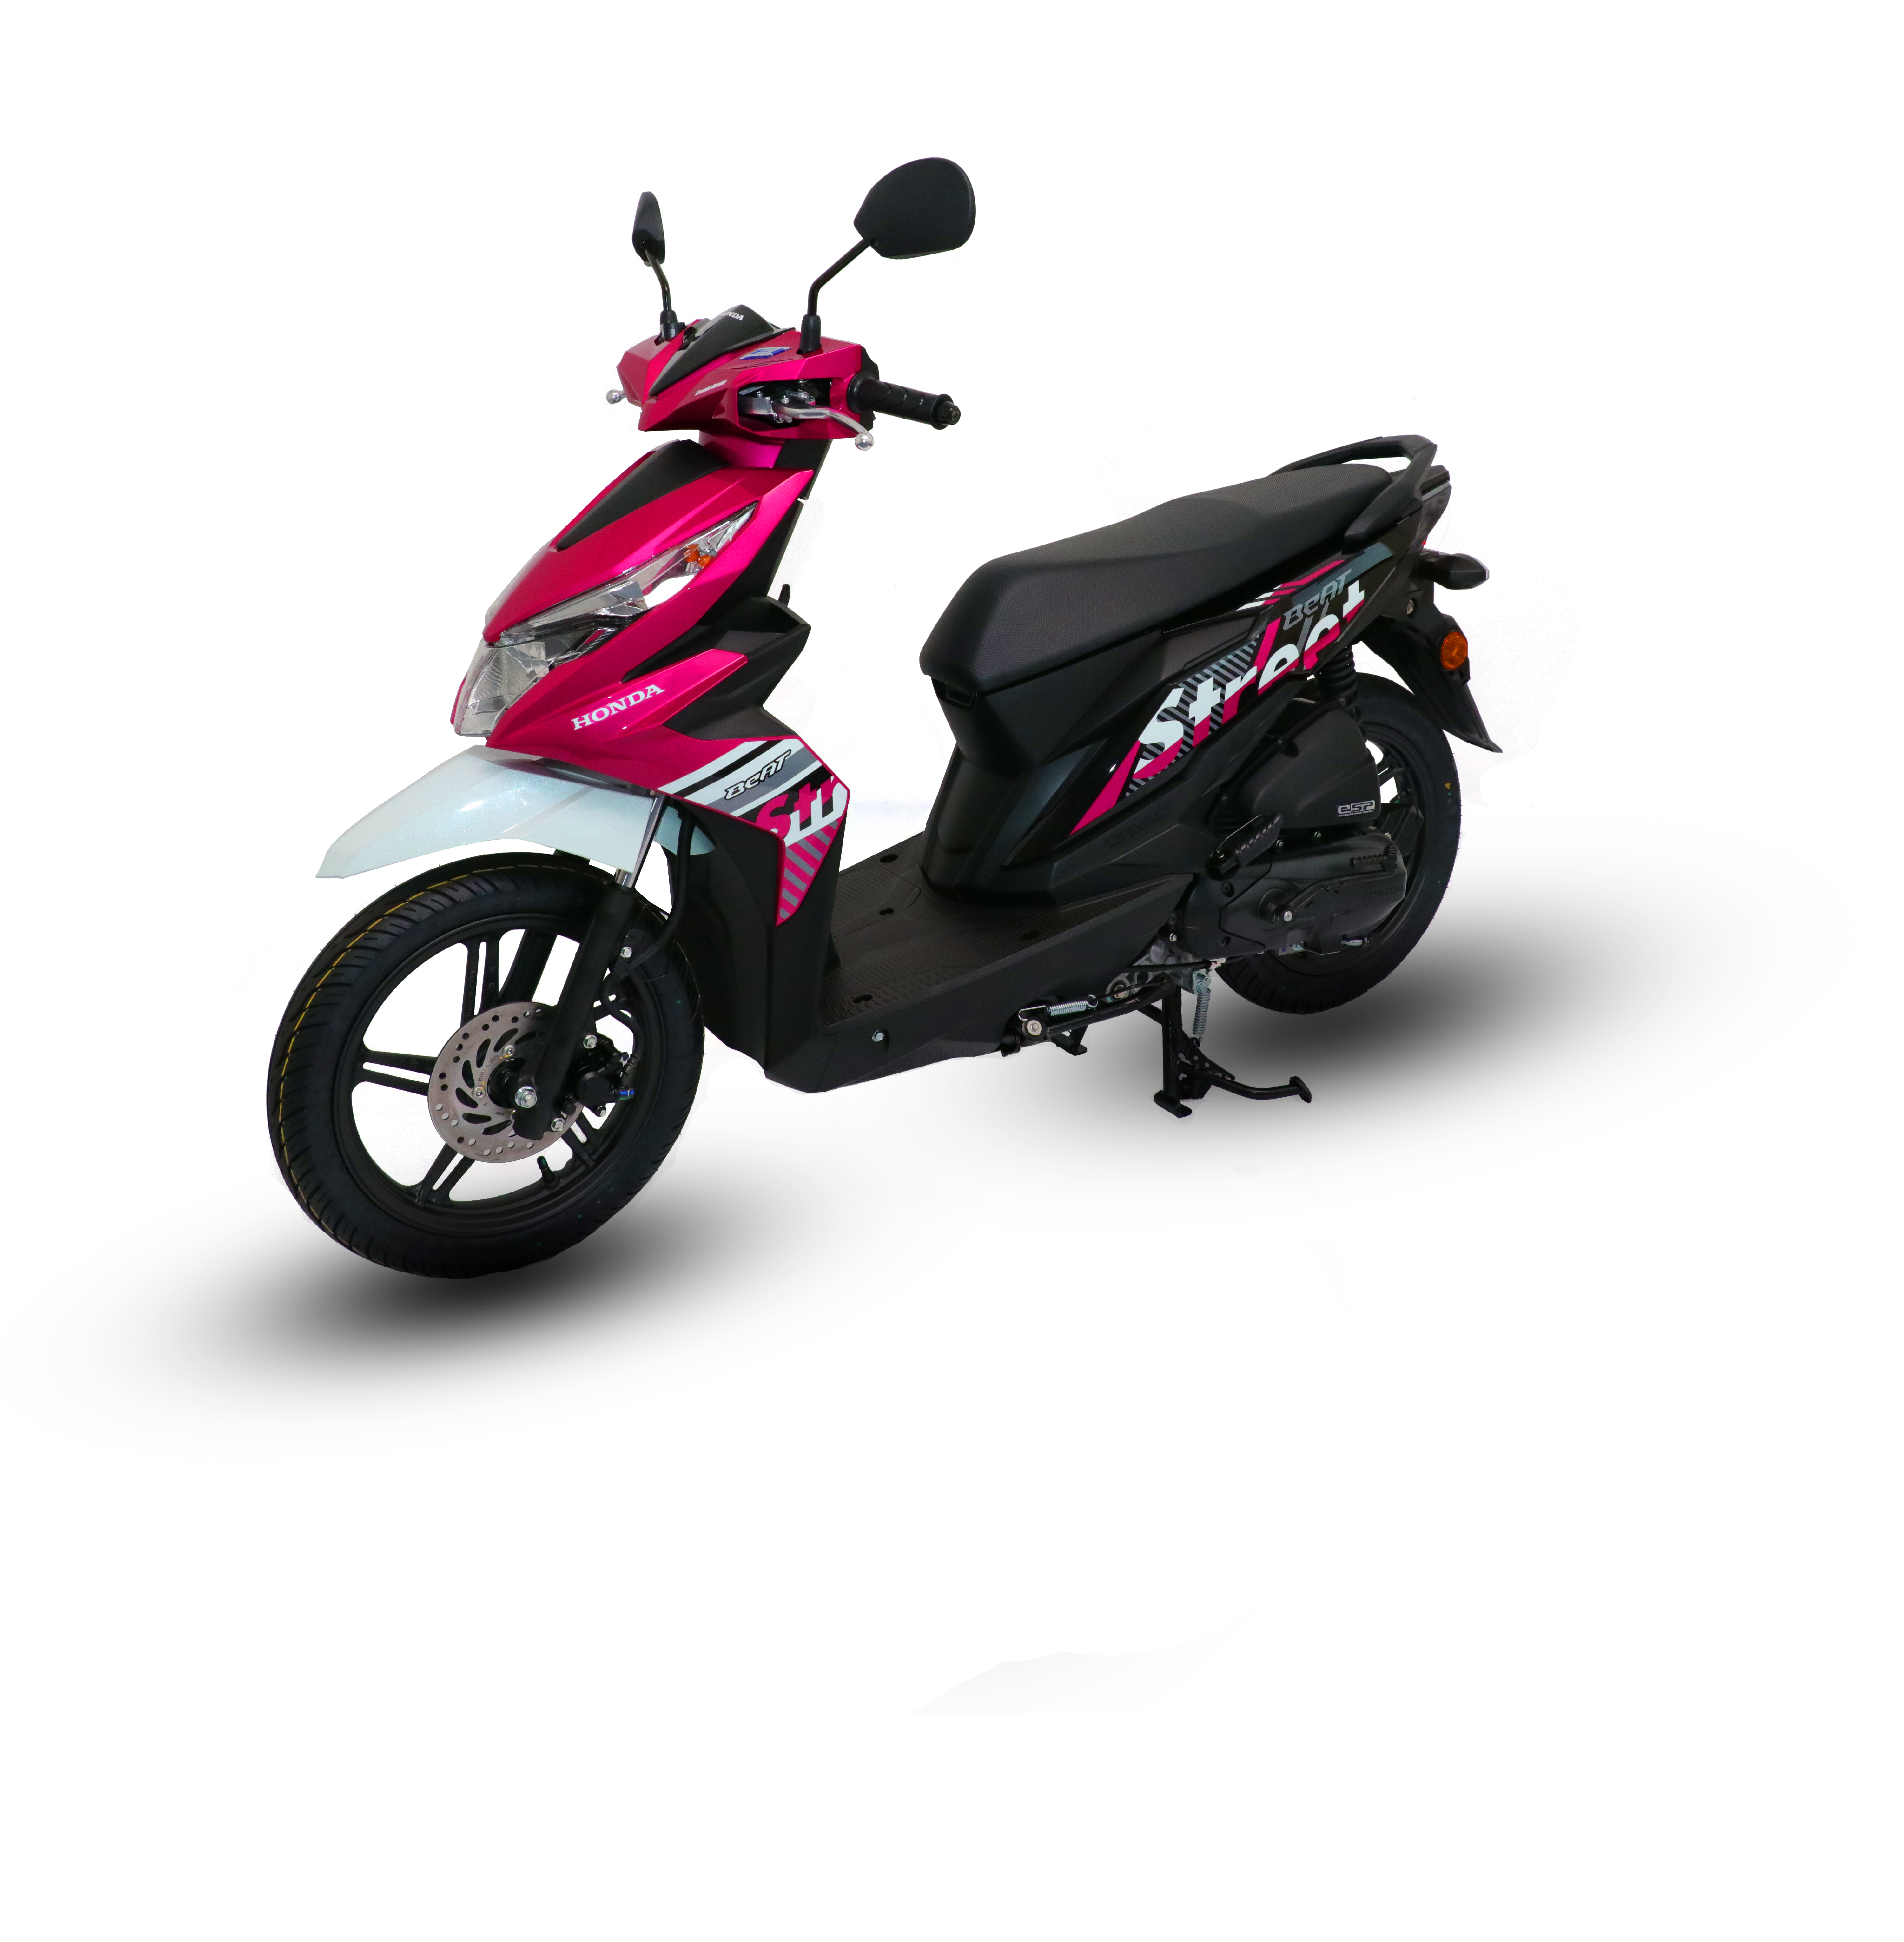 Boon Siew Honda Introduces New Colours for 2020 Honda Wave 